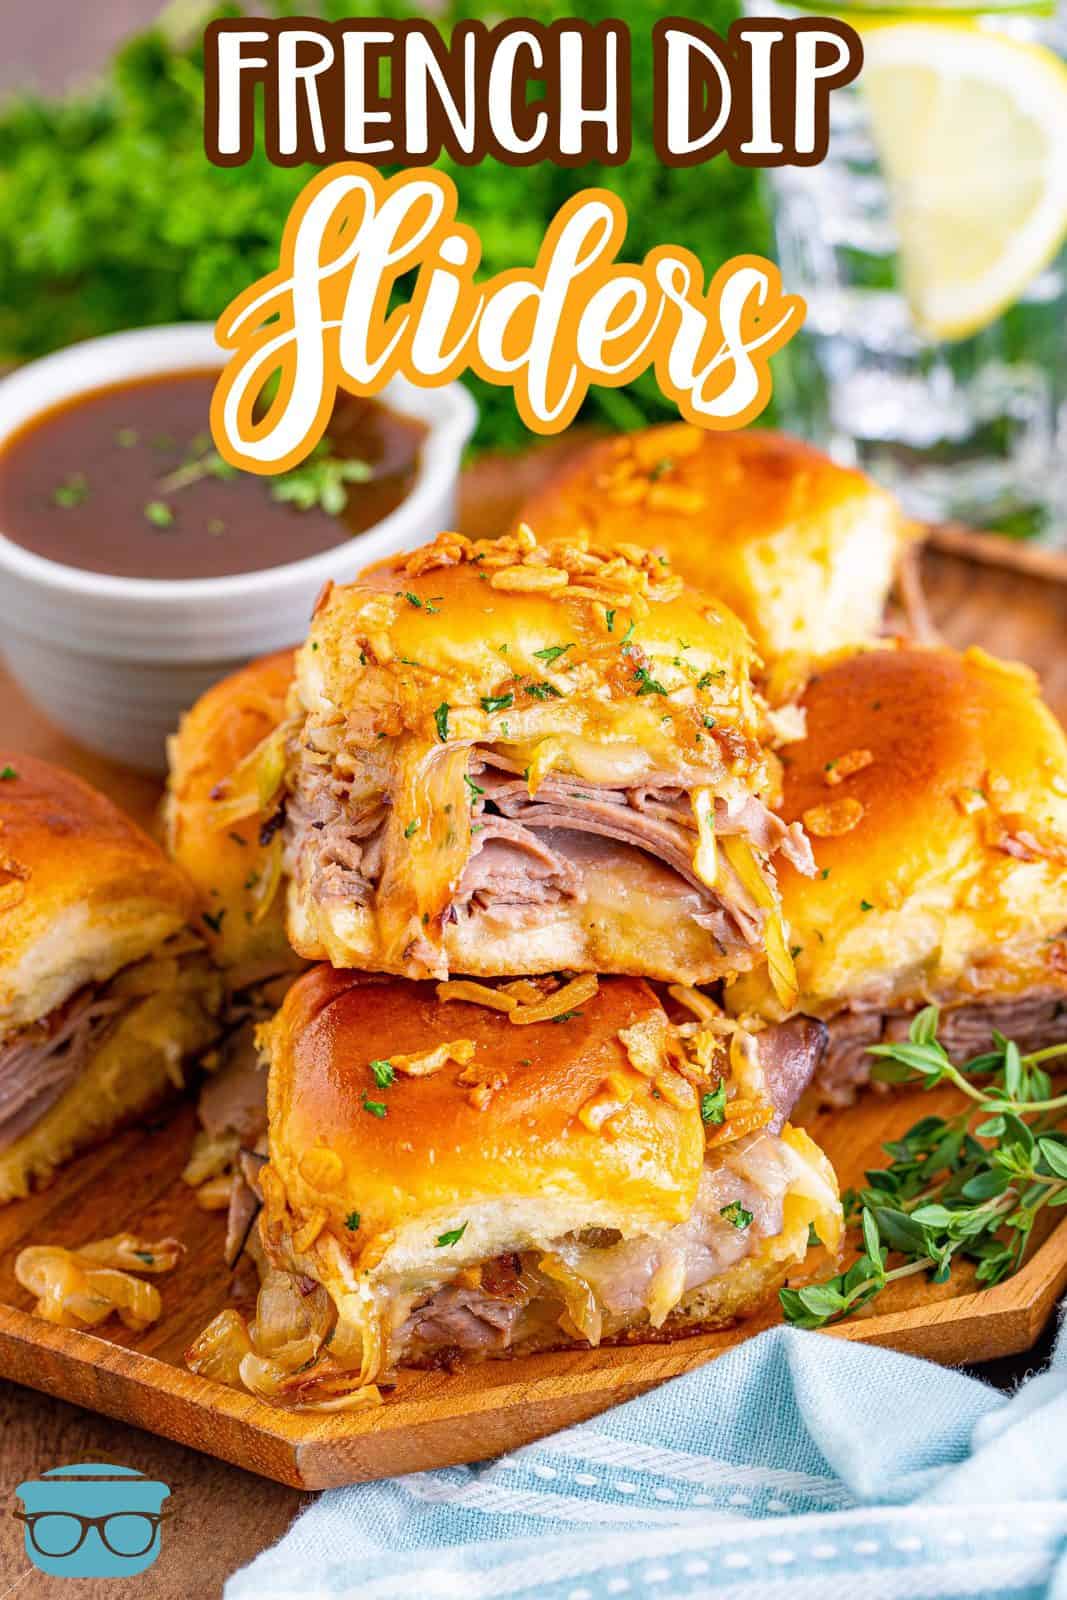 Pinterest image of French Dip Sliders stacked on top of one another on wooden plate.